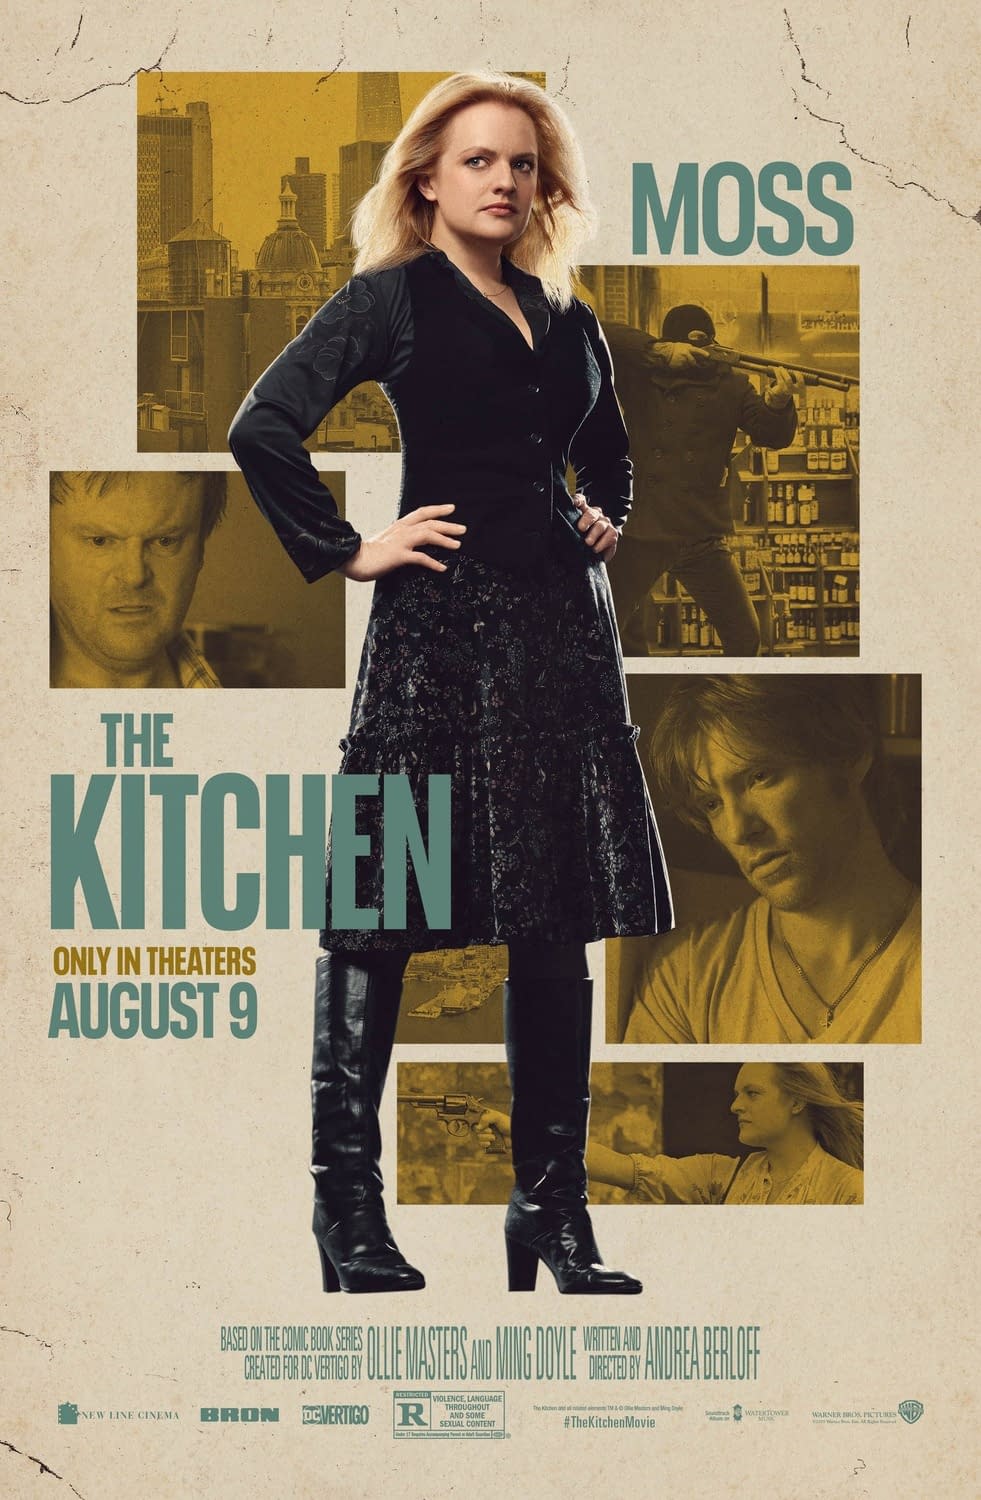 New Trailer and 3 New Character Posters for "The Kitchen"